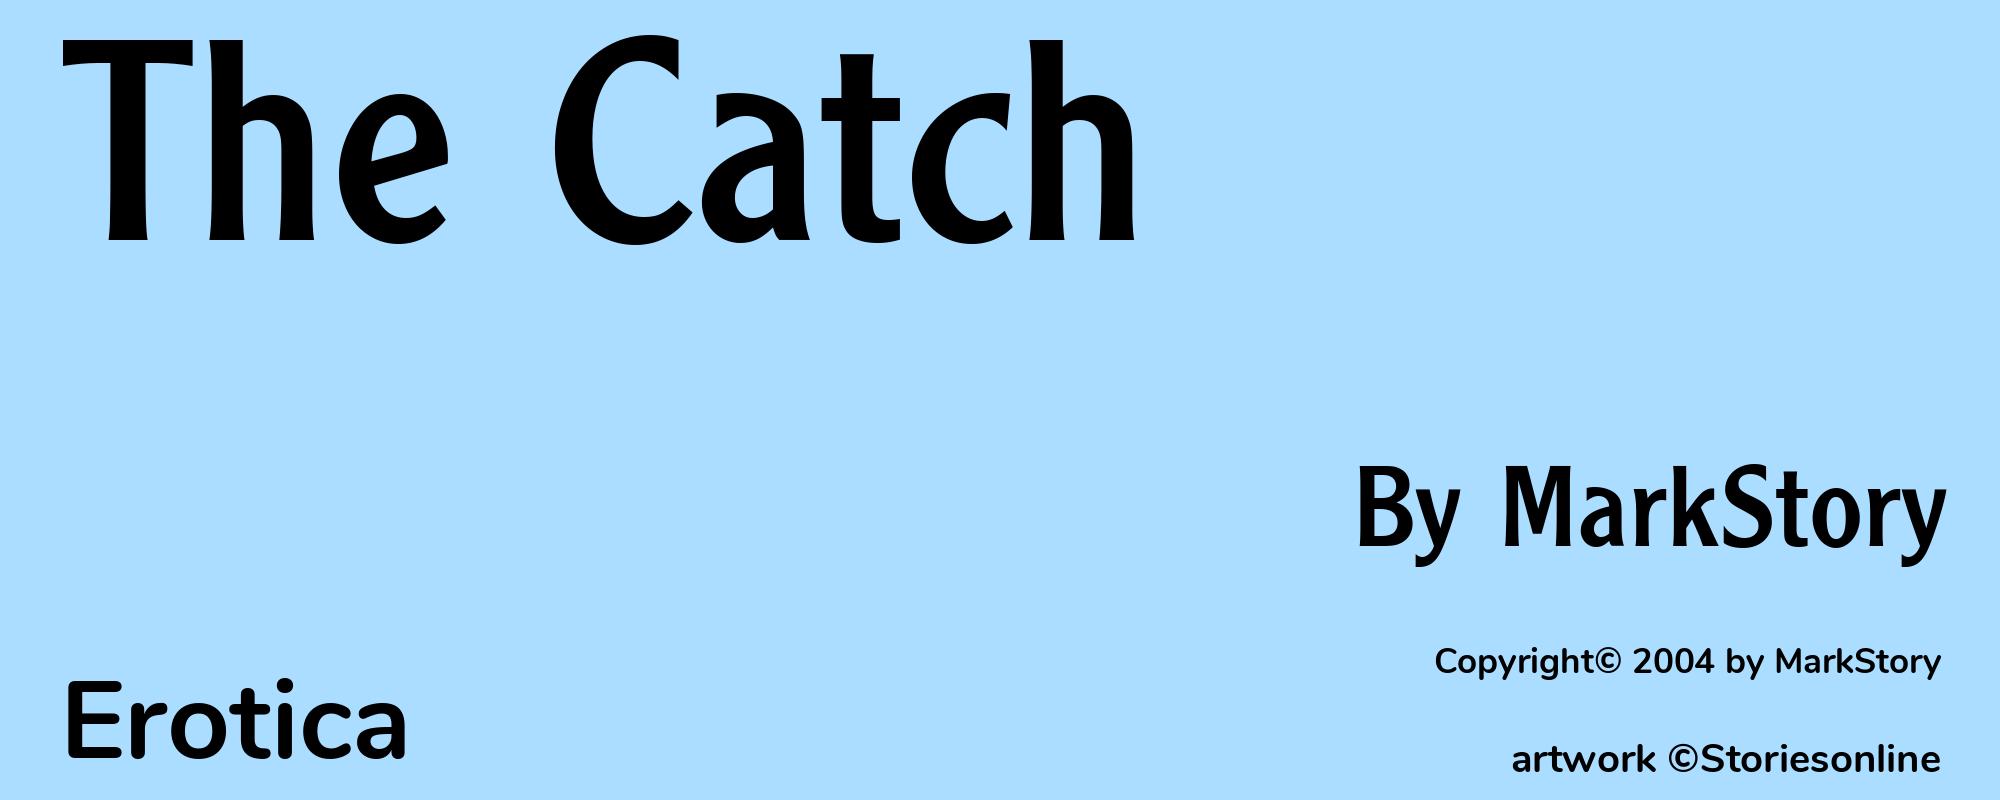 The Catch - Cover